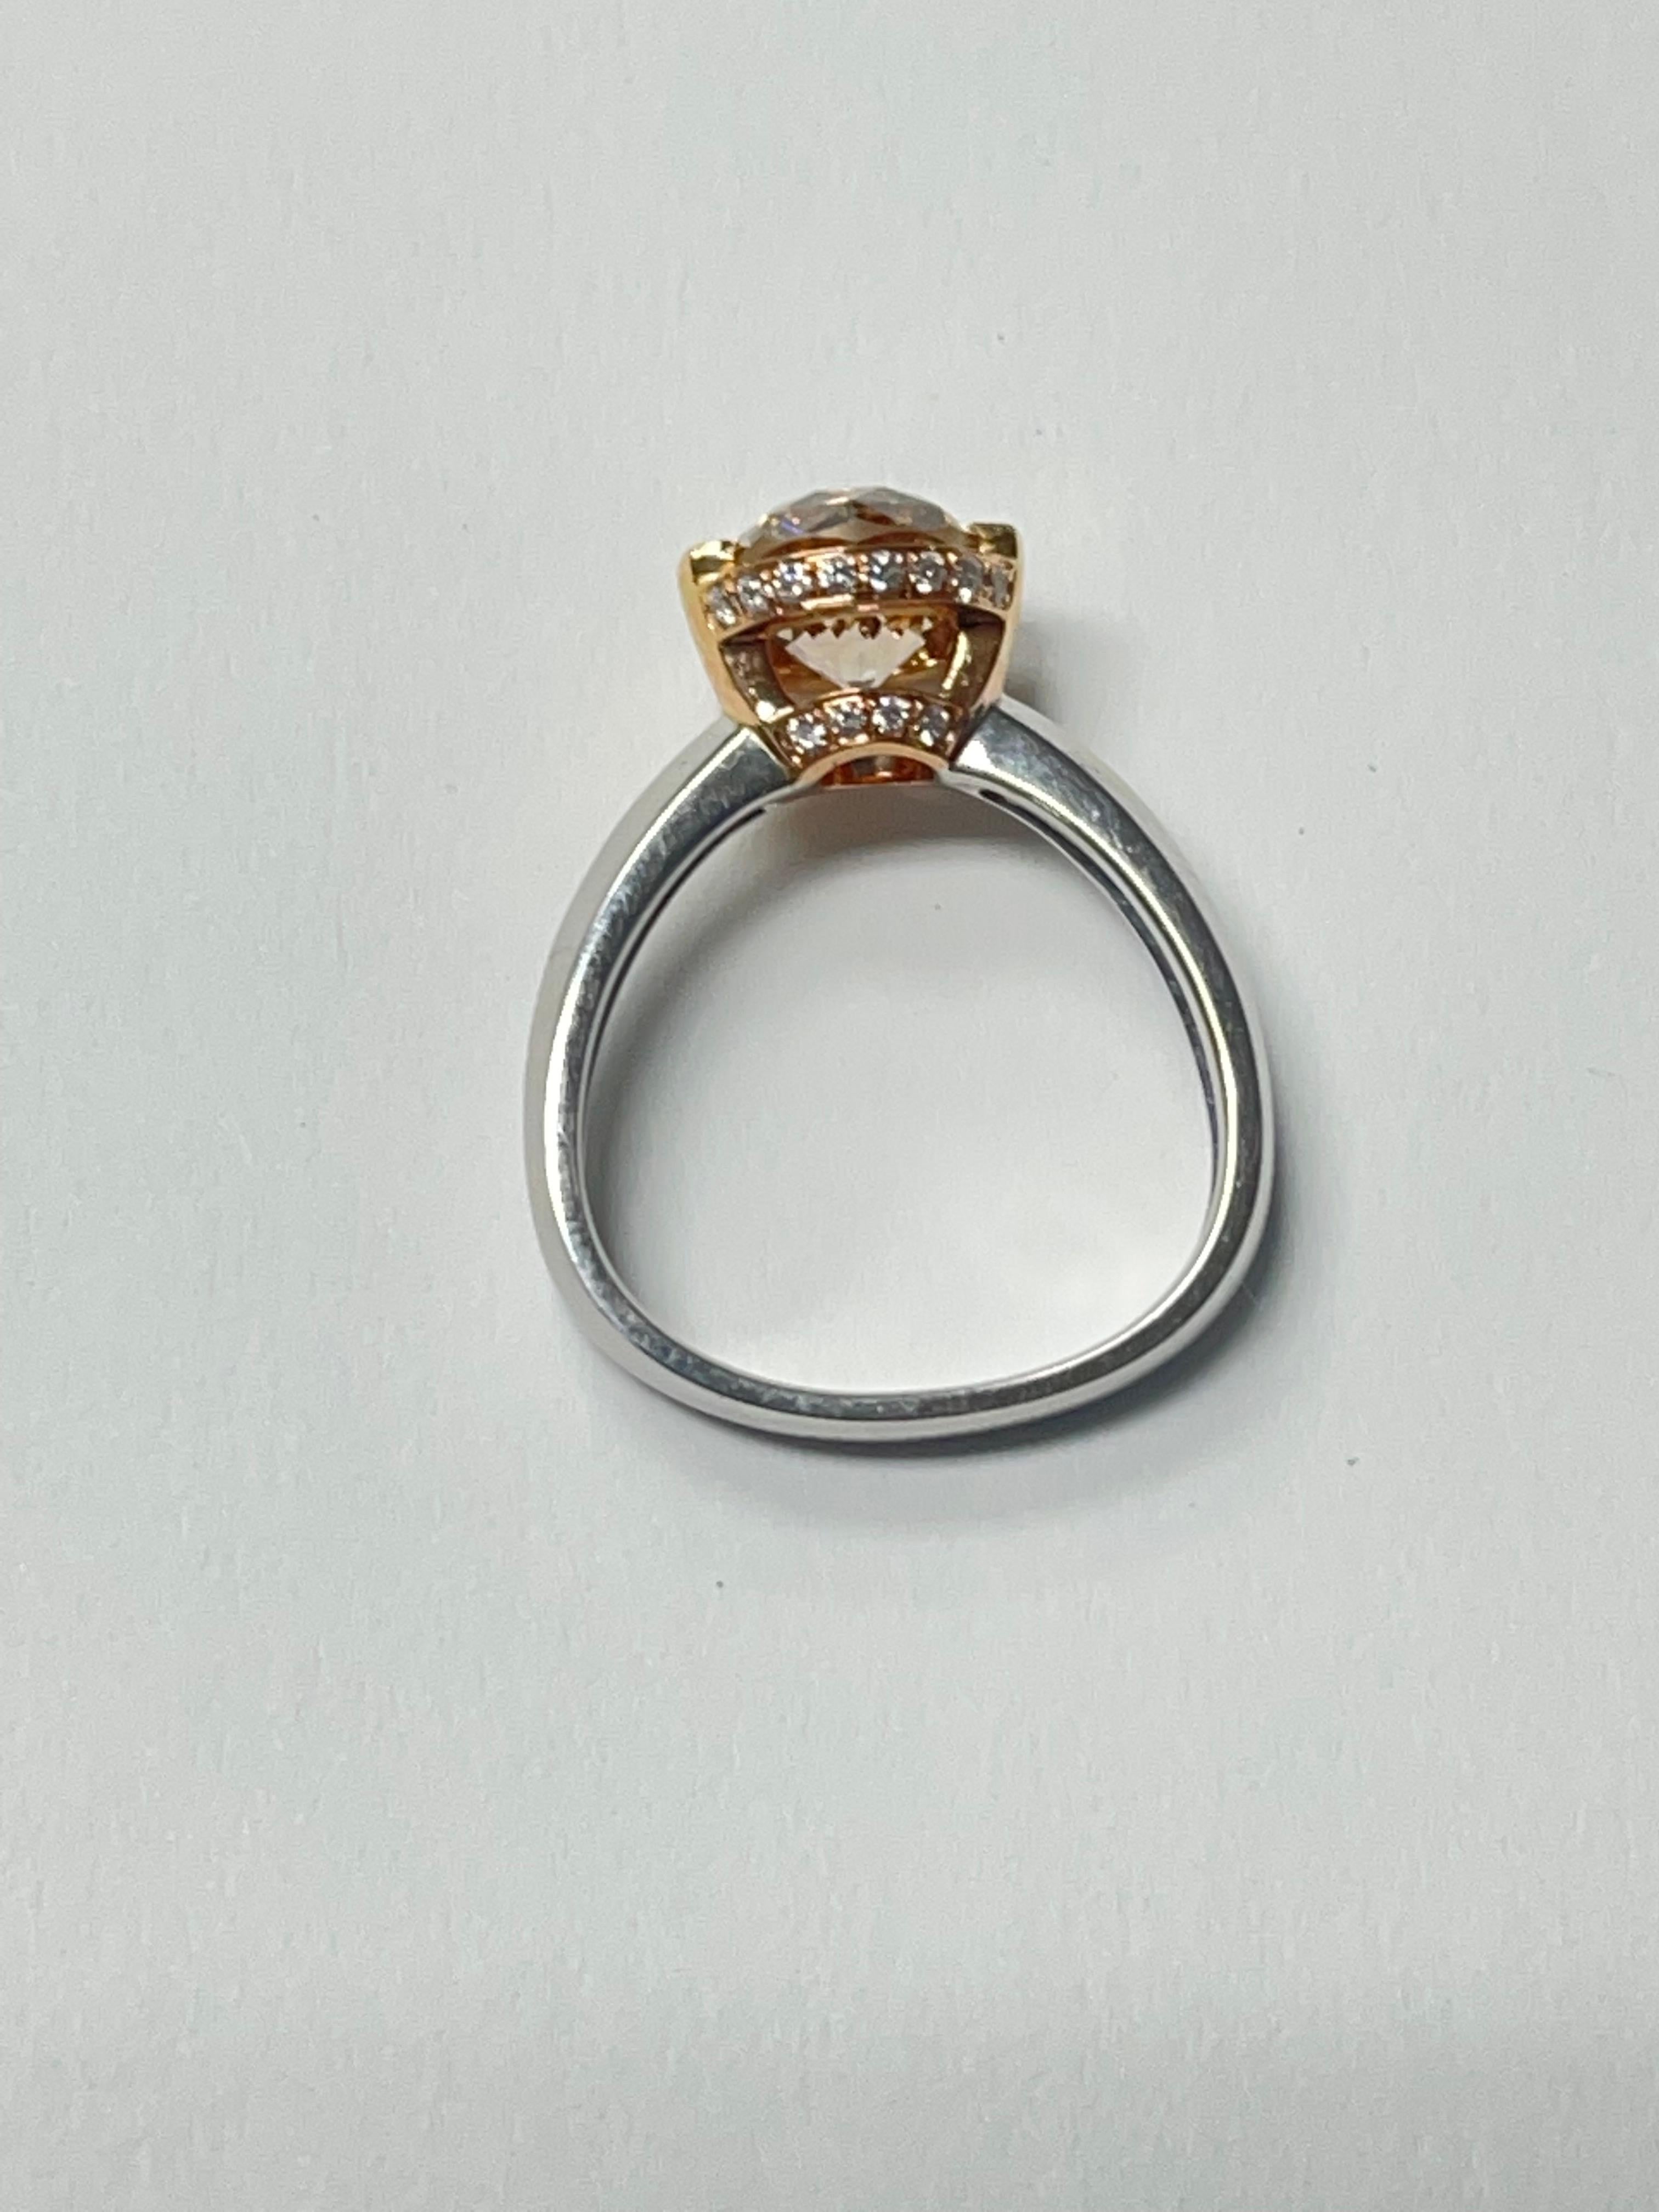 Contemporary Fancy Brown Sunflower Cut Diamond Engagement Ring in 18 K White and Rose Gold